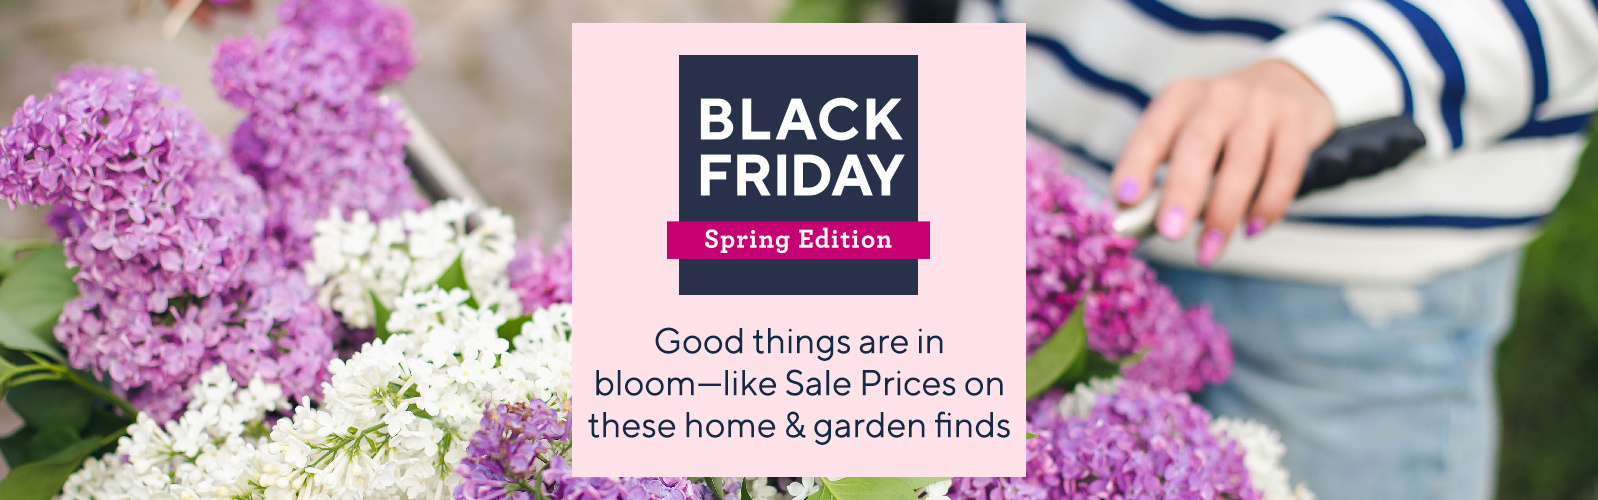 Black Friday Spring Edition.  Good things are in bloom - like Sale Prices on these home & garden finds